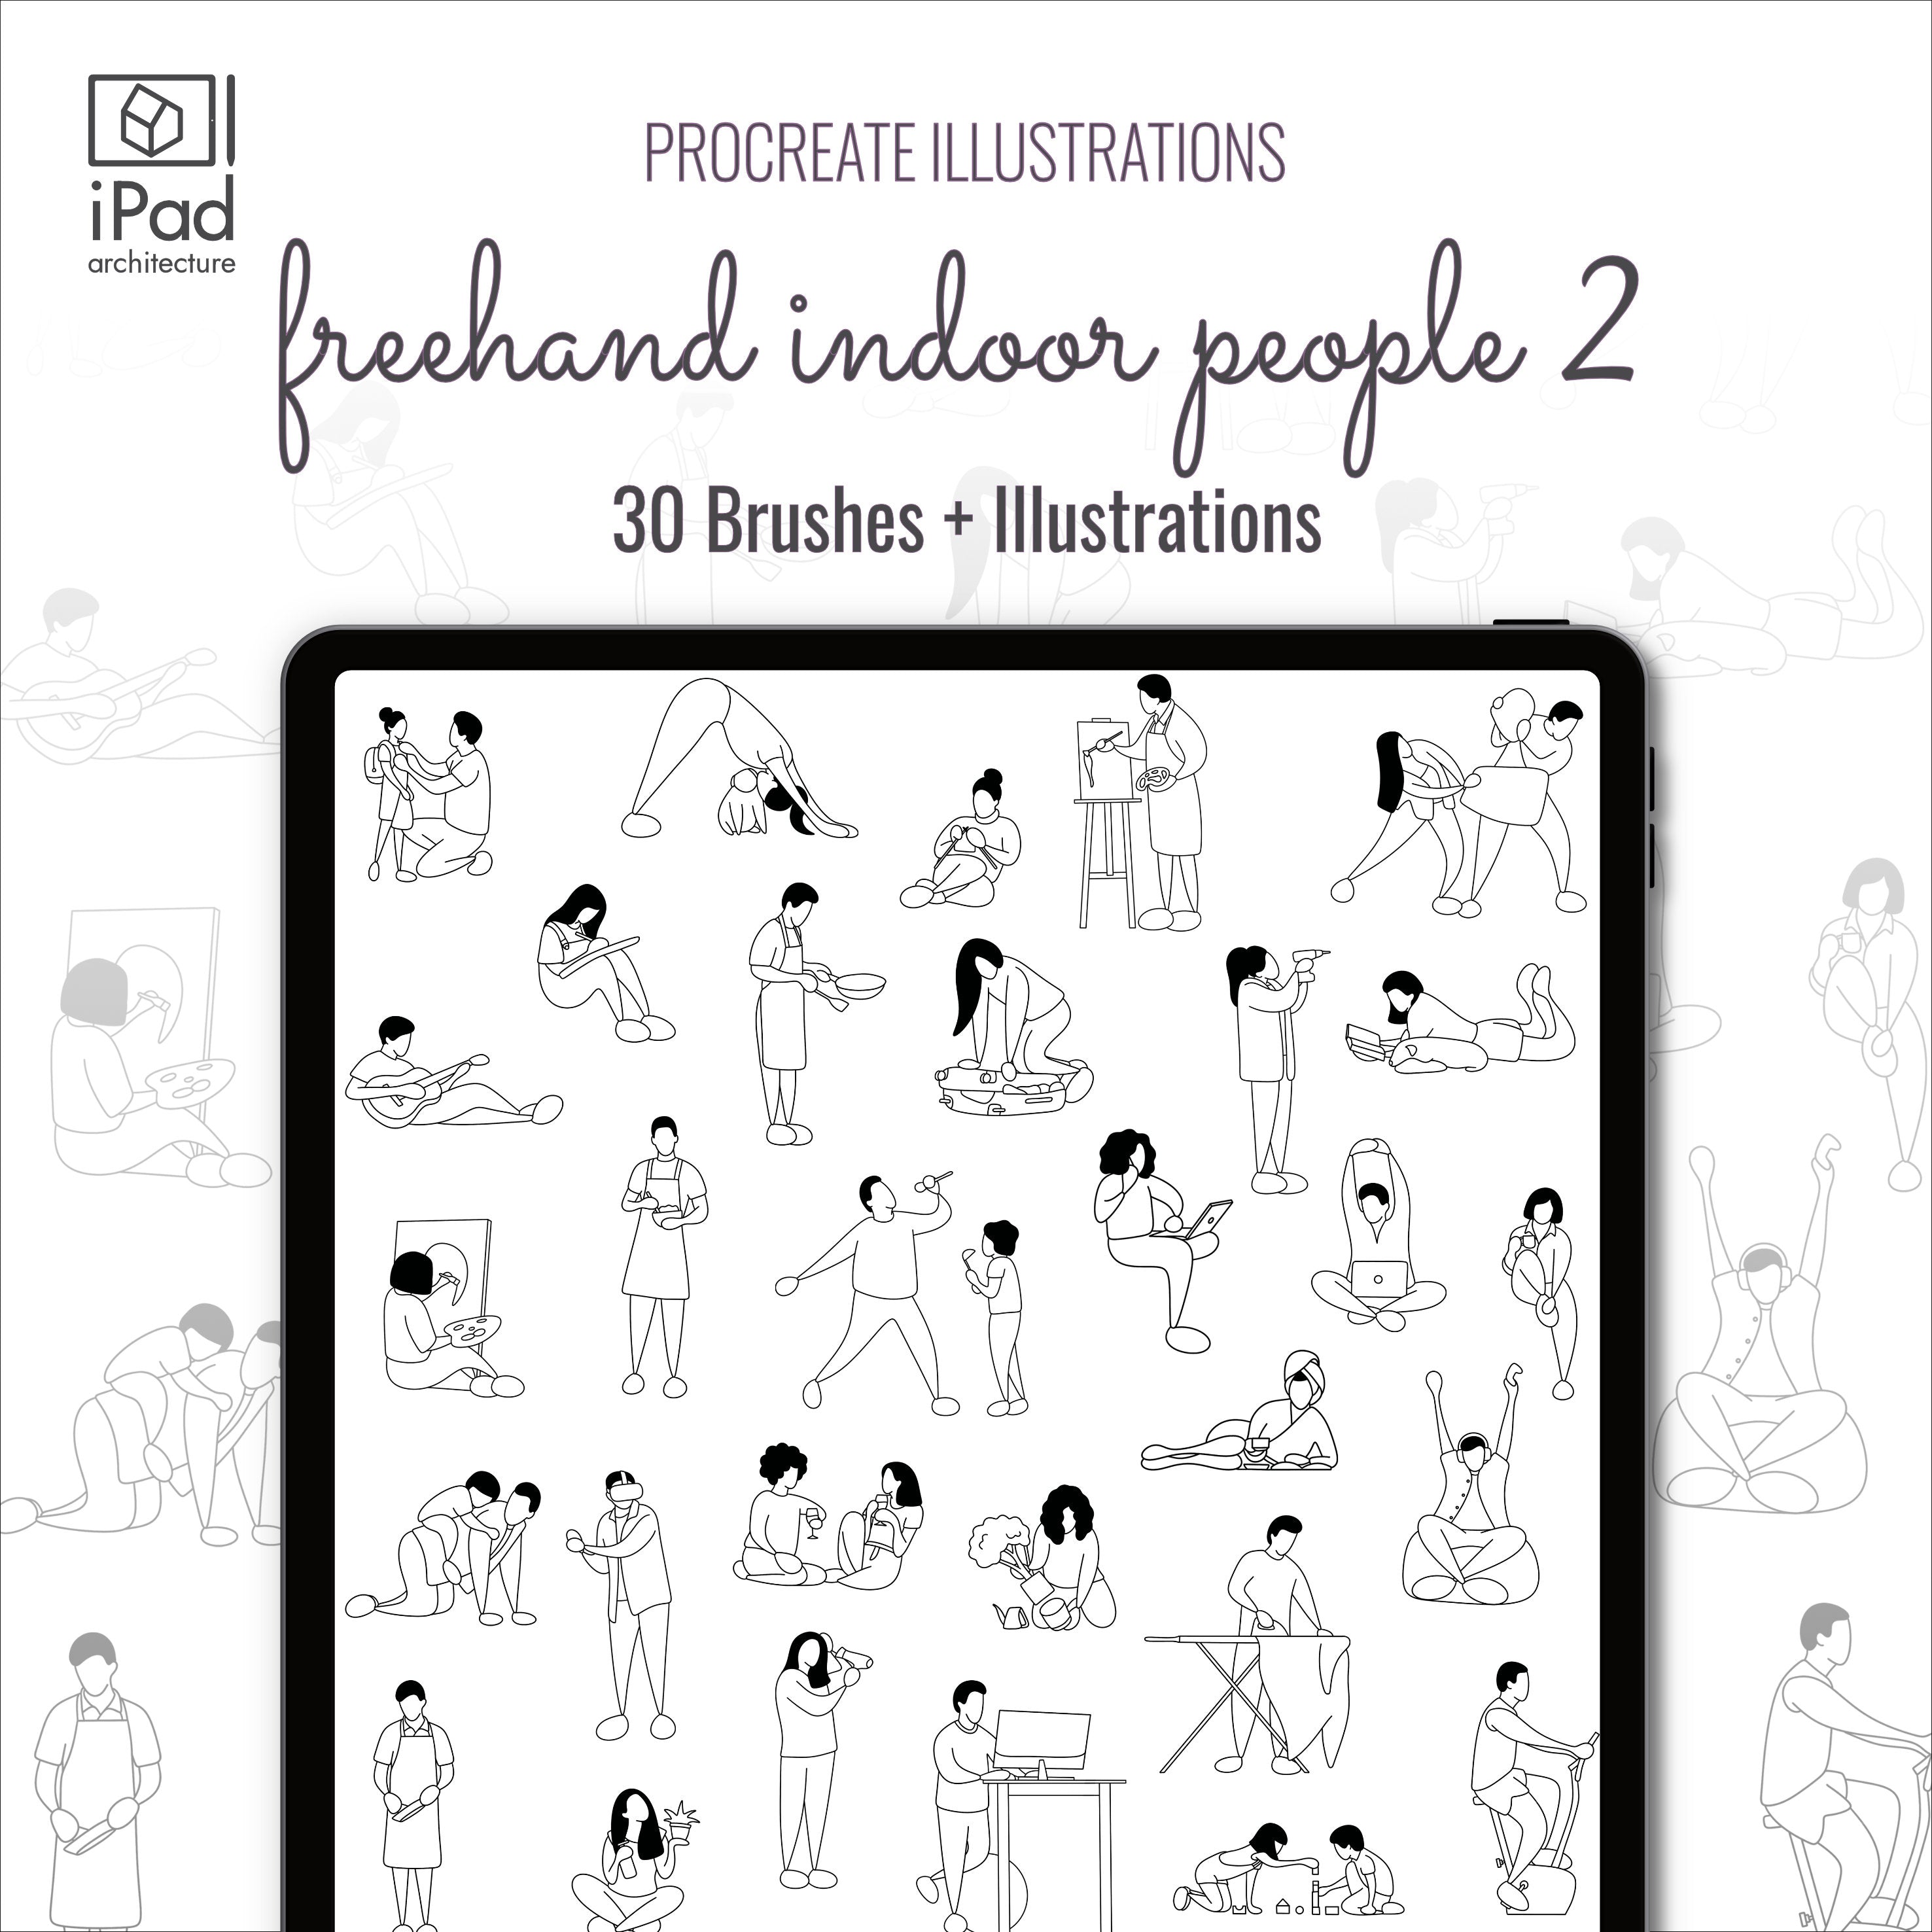 Procreate Freehand Indoor People Brushset & Illustrations 2 PNG - Toffu Co